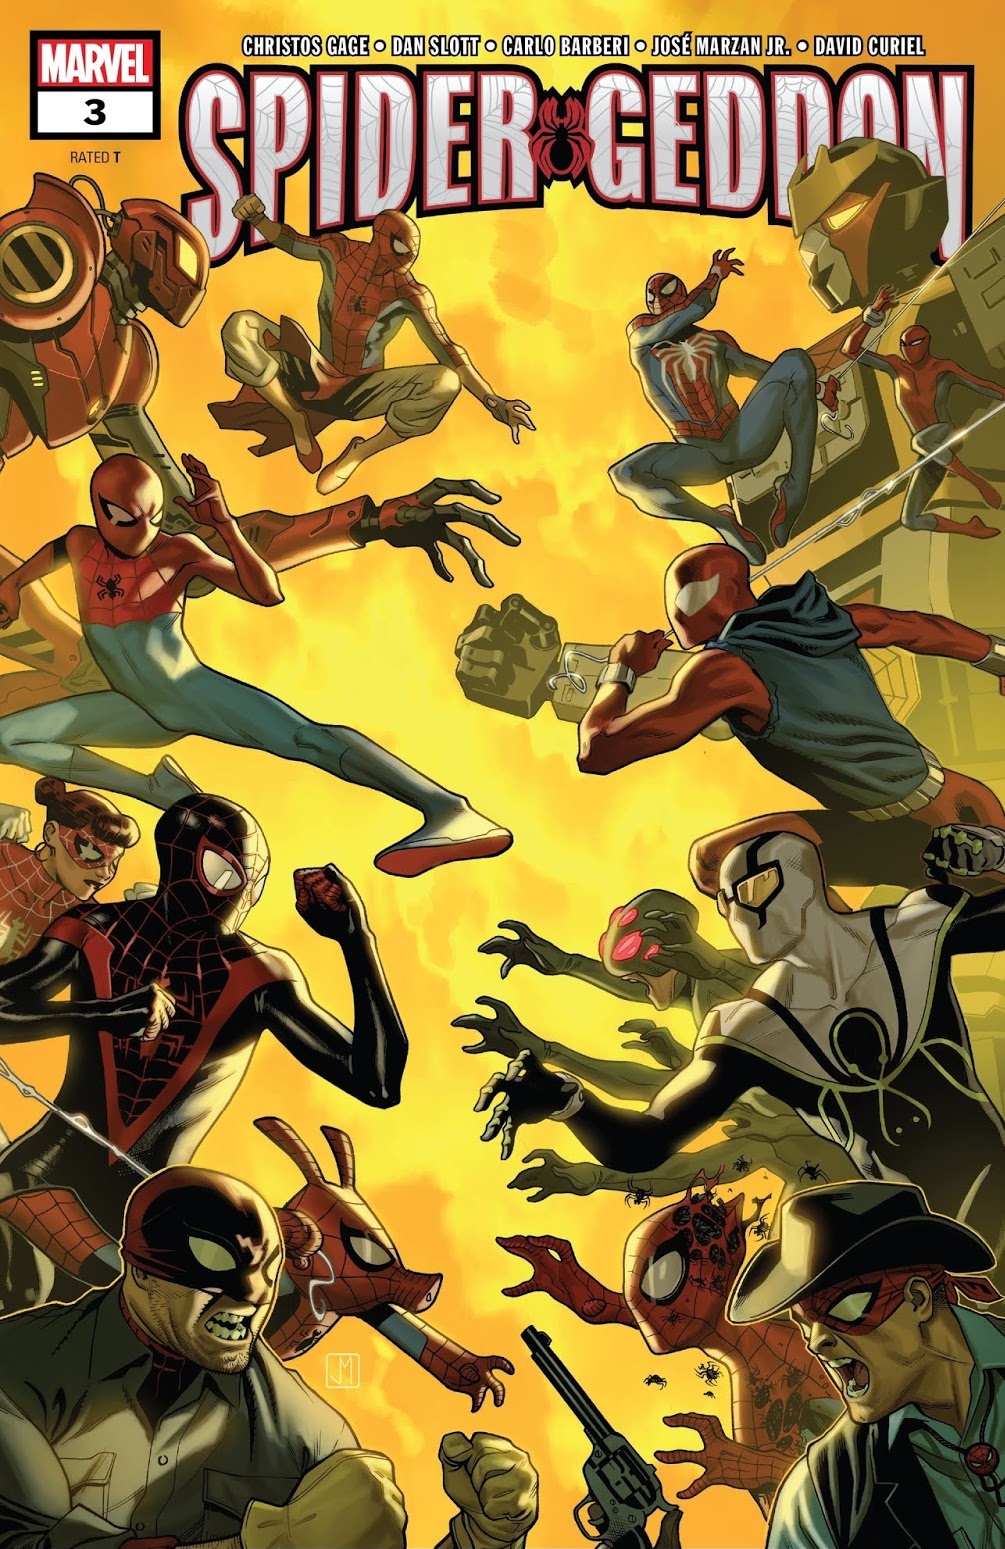 COMIC BOOK FAN AND LOVER: SPIDER-GEDDON # 3 – MARVEL COMICS